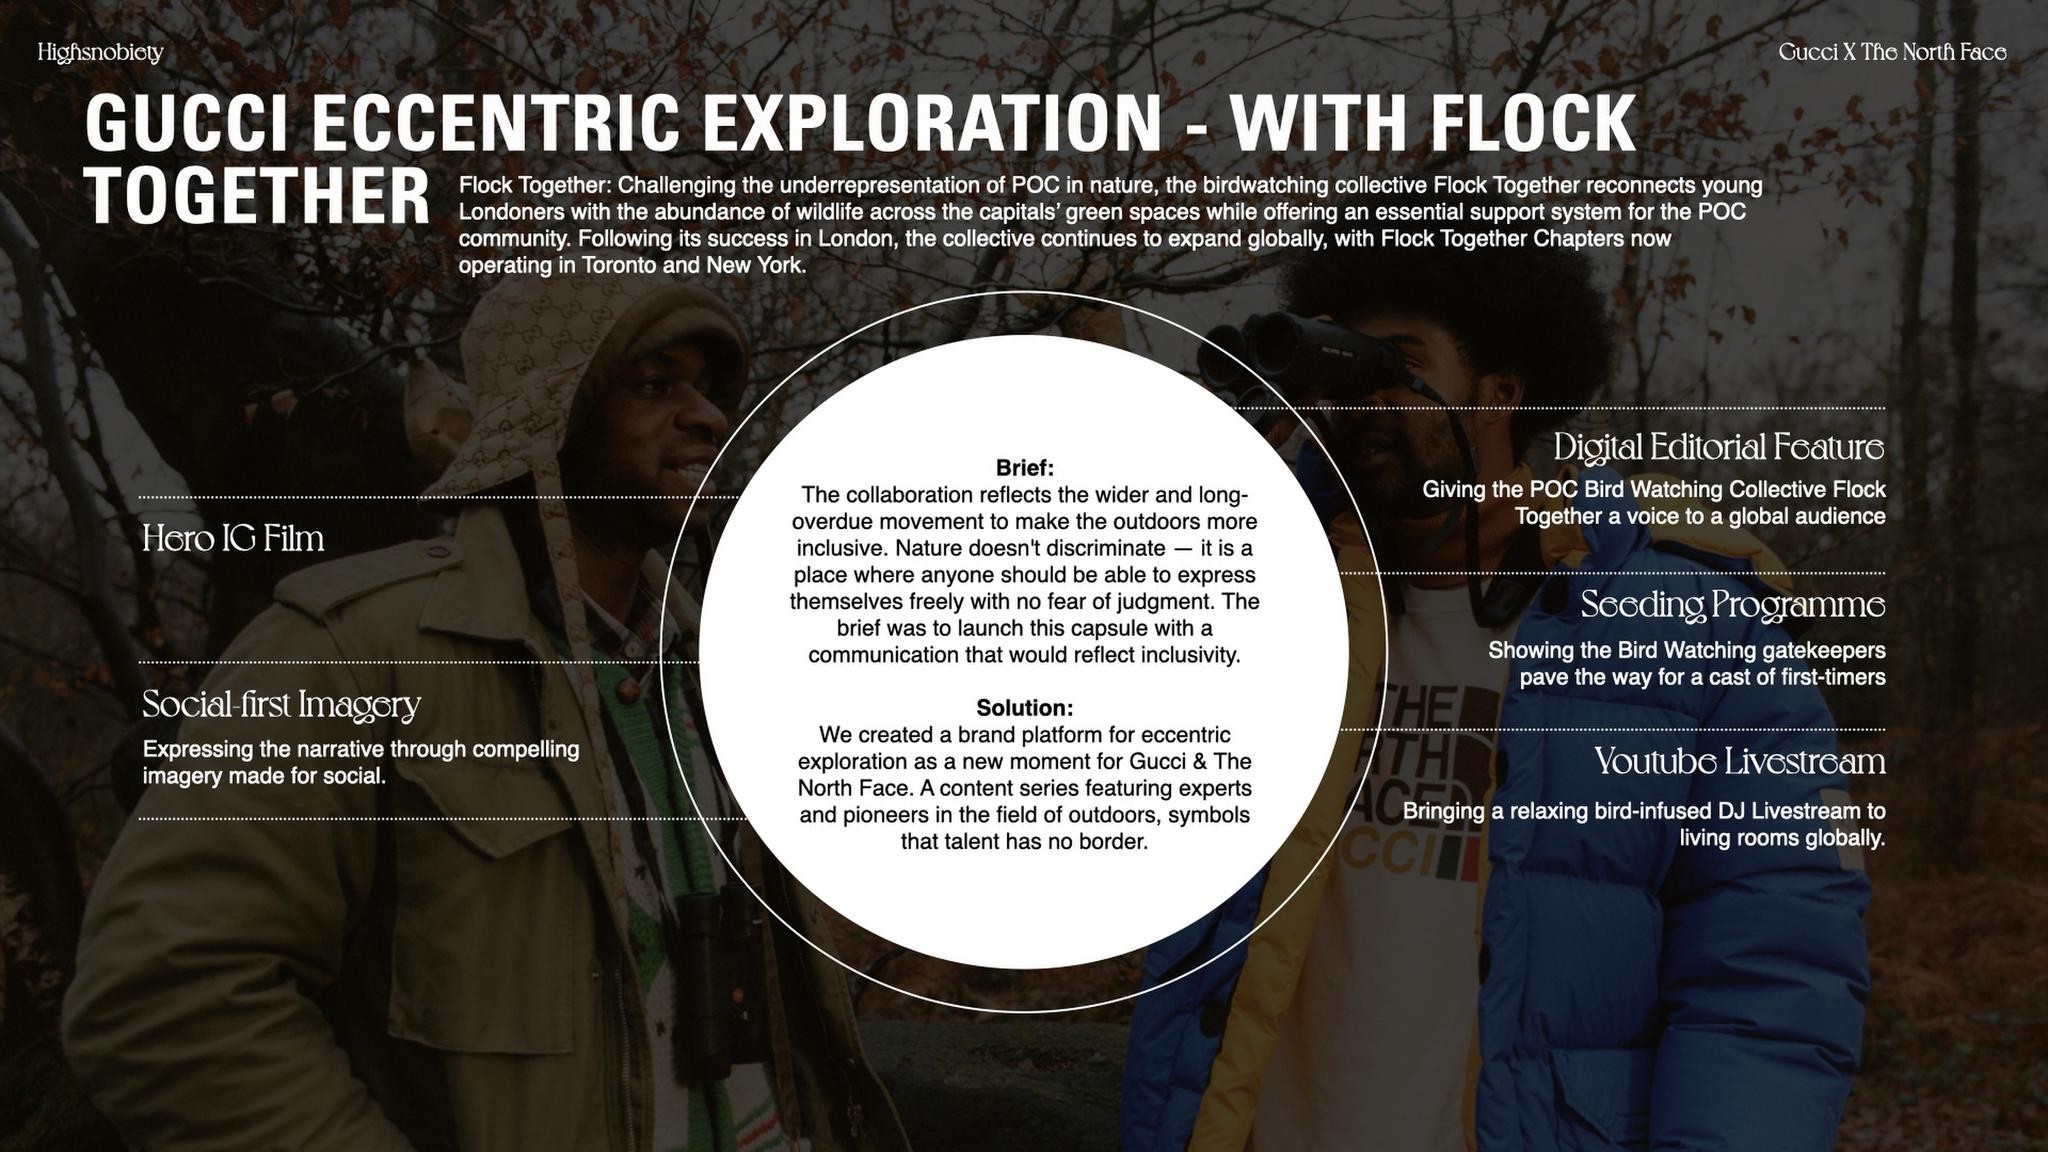 Gucci Eccentric Exploration - With Flock Together